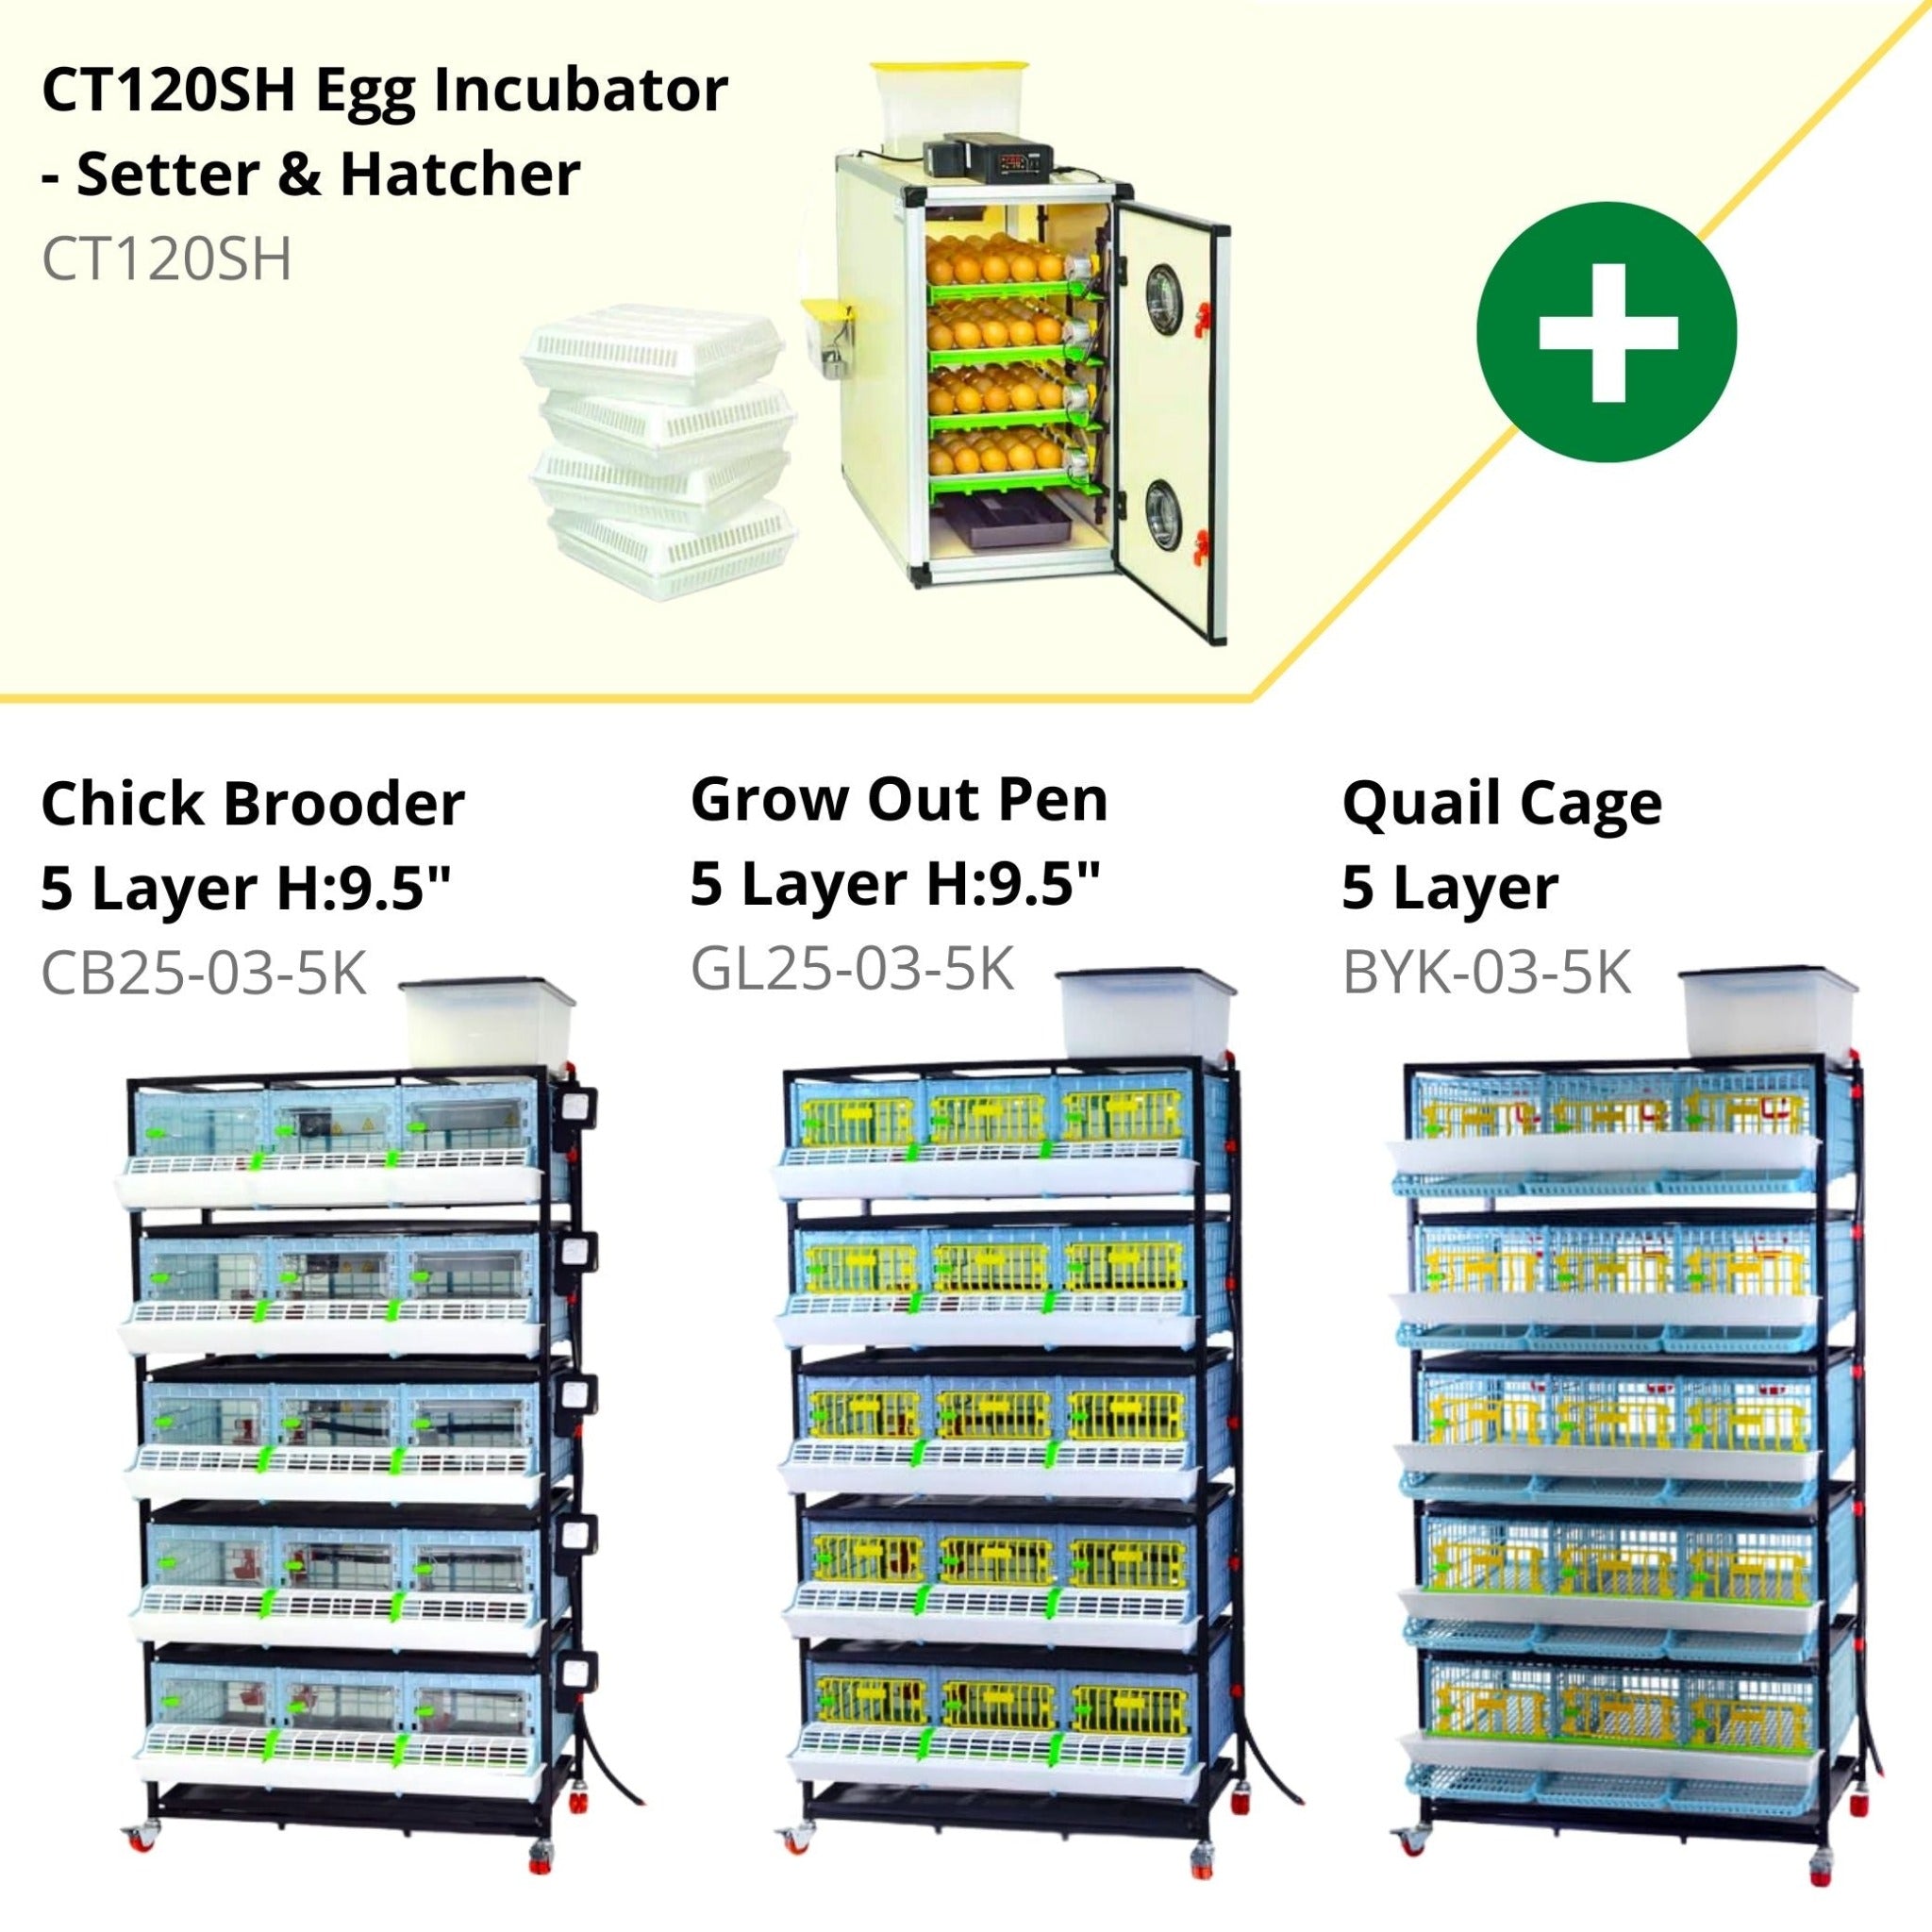 Hatching Time Cimuka. Complete system can be seen in image. Incubator with setting trays, hatching baskets, digital controls and humidity system. Chick brooder, grow out pen and quail cage are all in image.